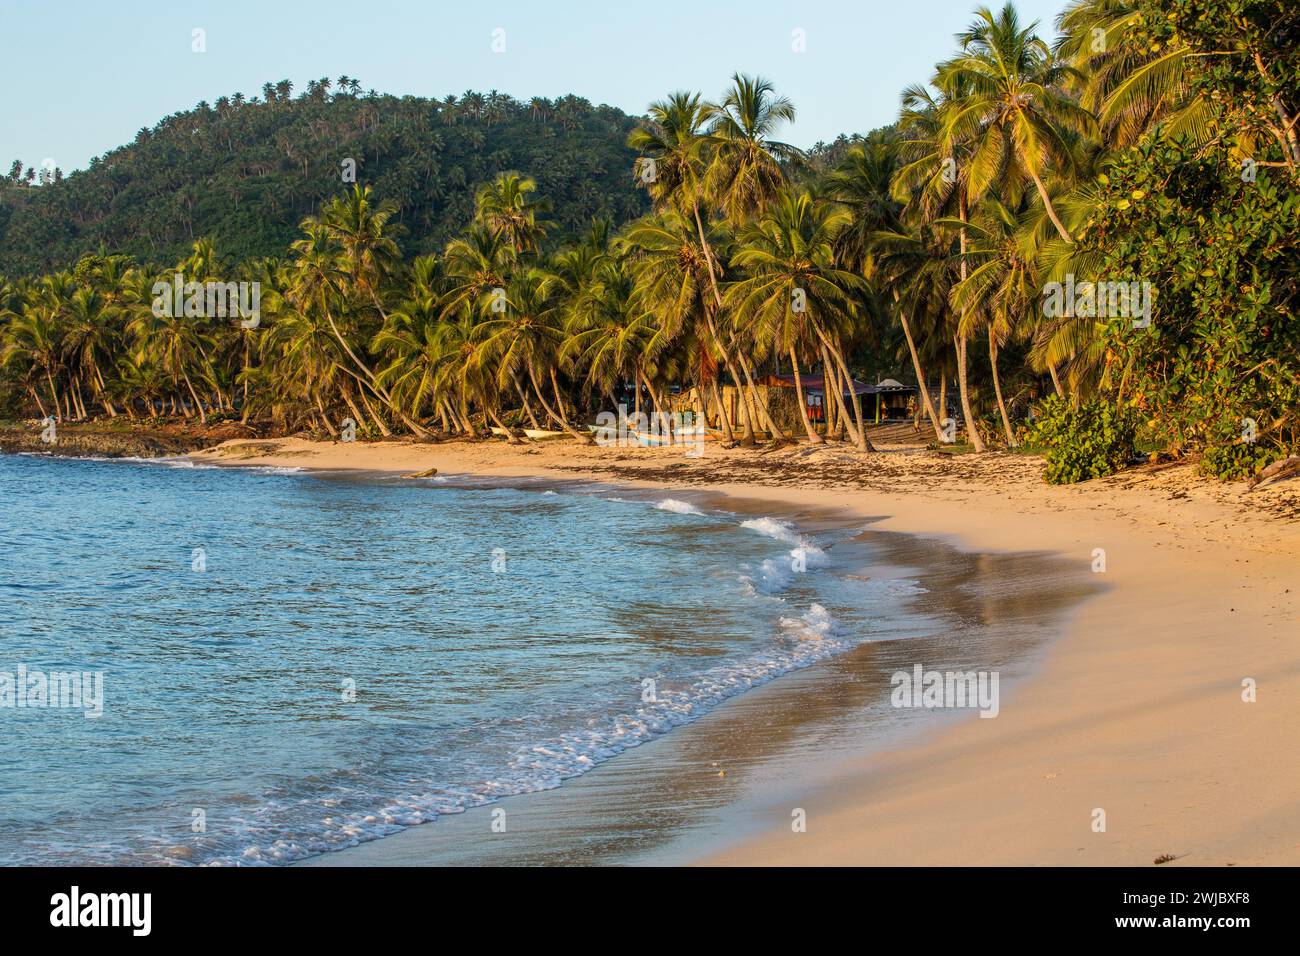 Palm trees on the beach near Samana in the Dominican Republic.  Fishing boats wait on the sandy beach. Stock Photo